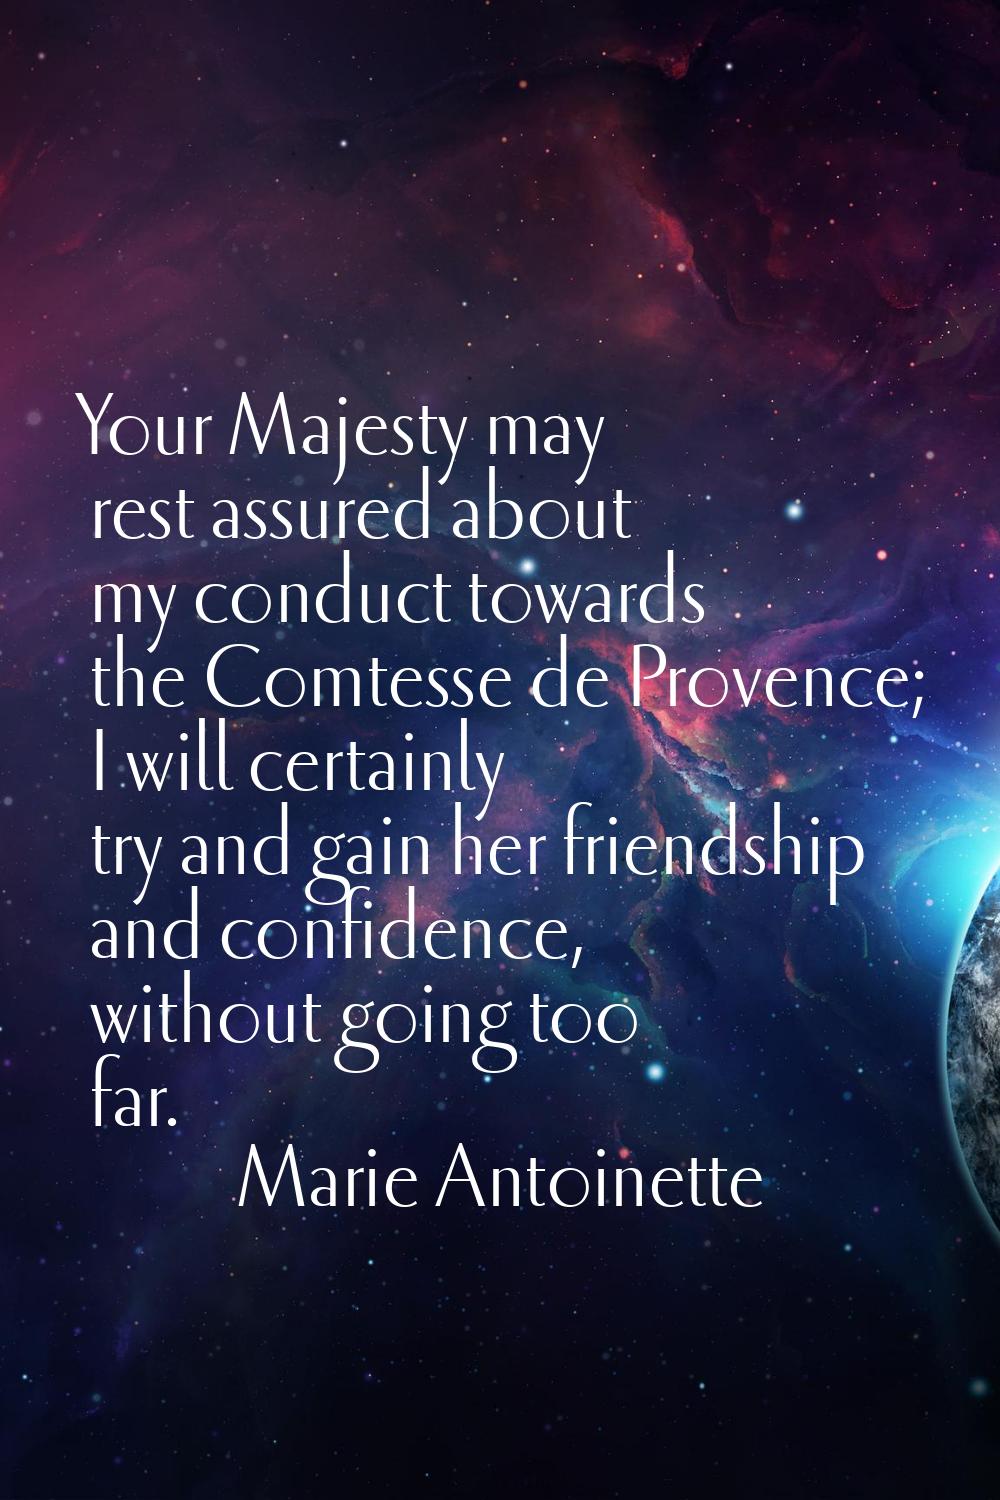 Your Majesty may rest assured about my conduct towards the Comtesse de Provence; I will certainly t